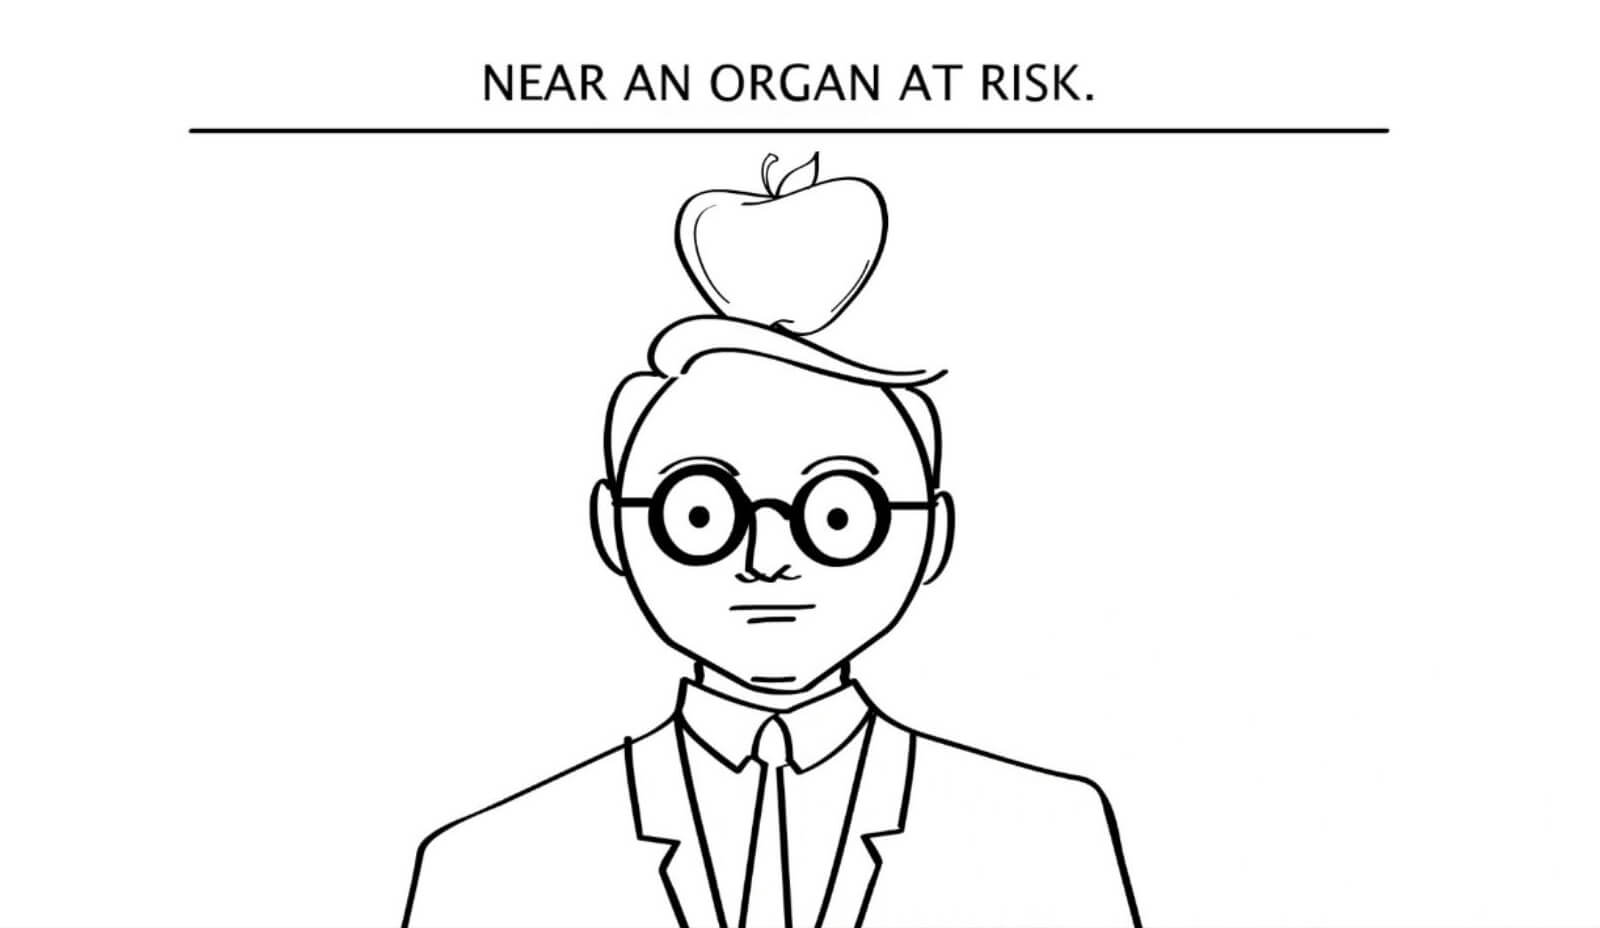 an isocenter near an organ at risk. (Picture the apple on someone’s head.)